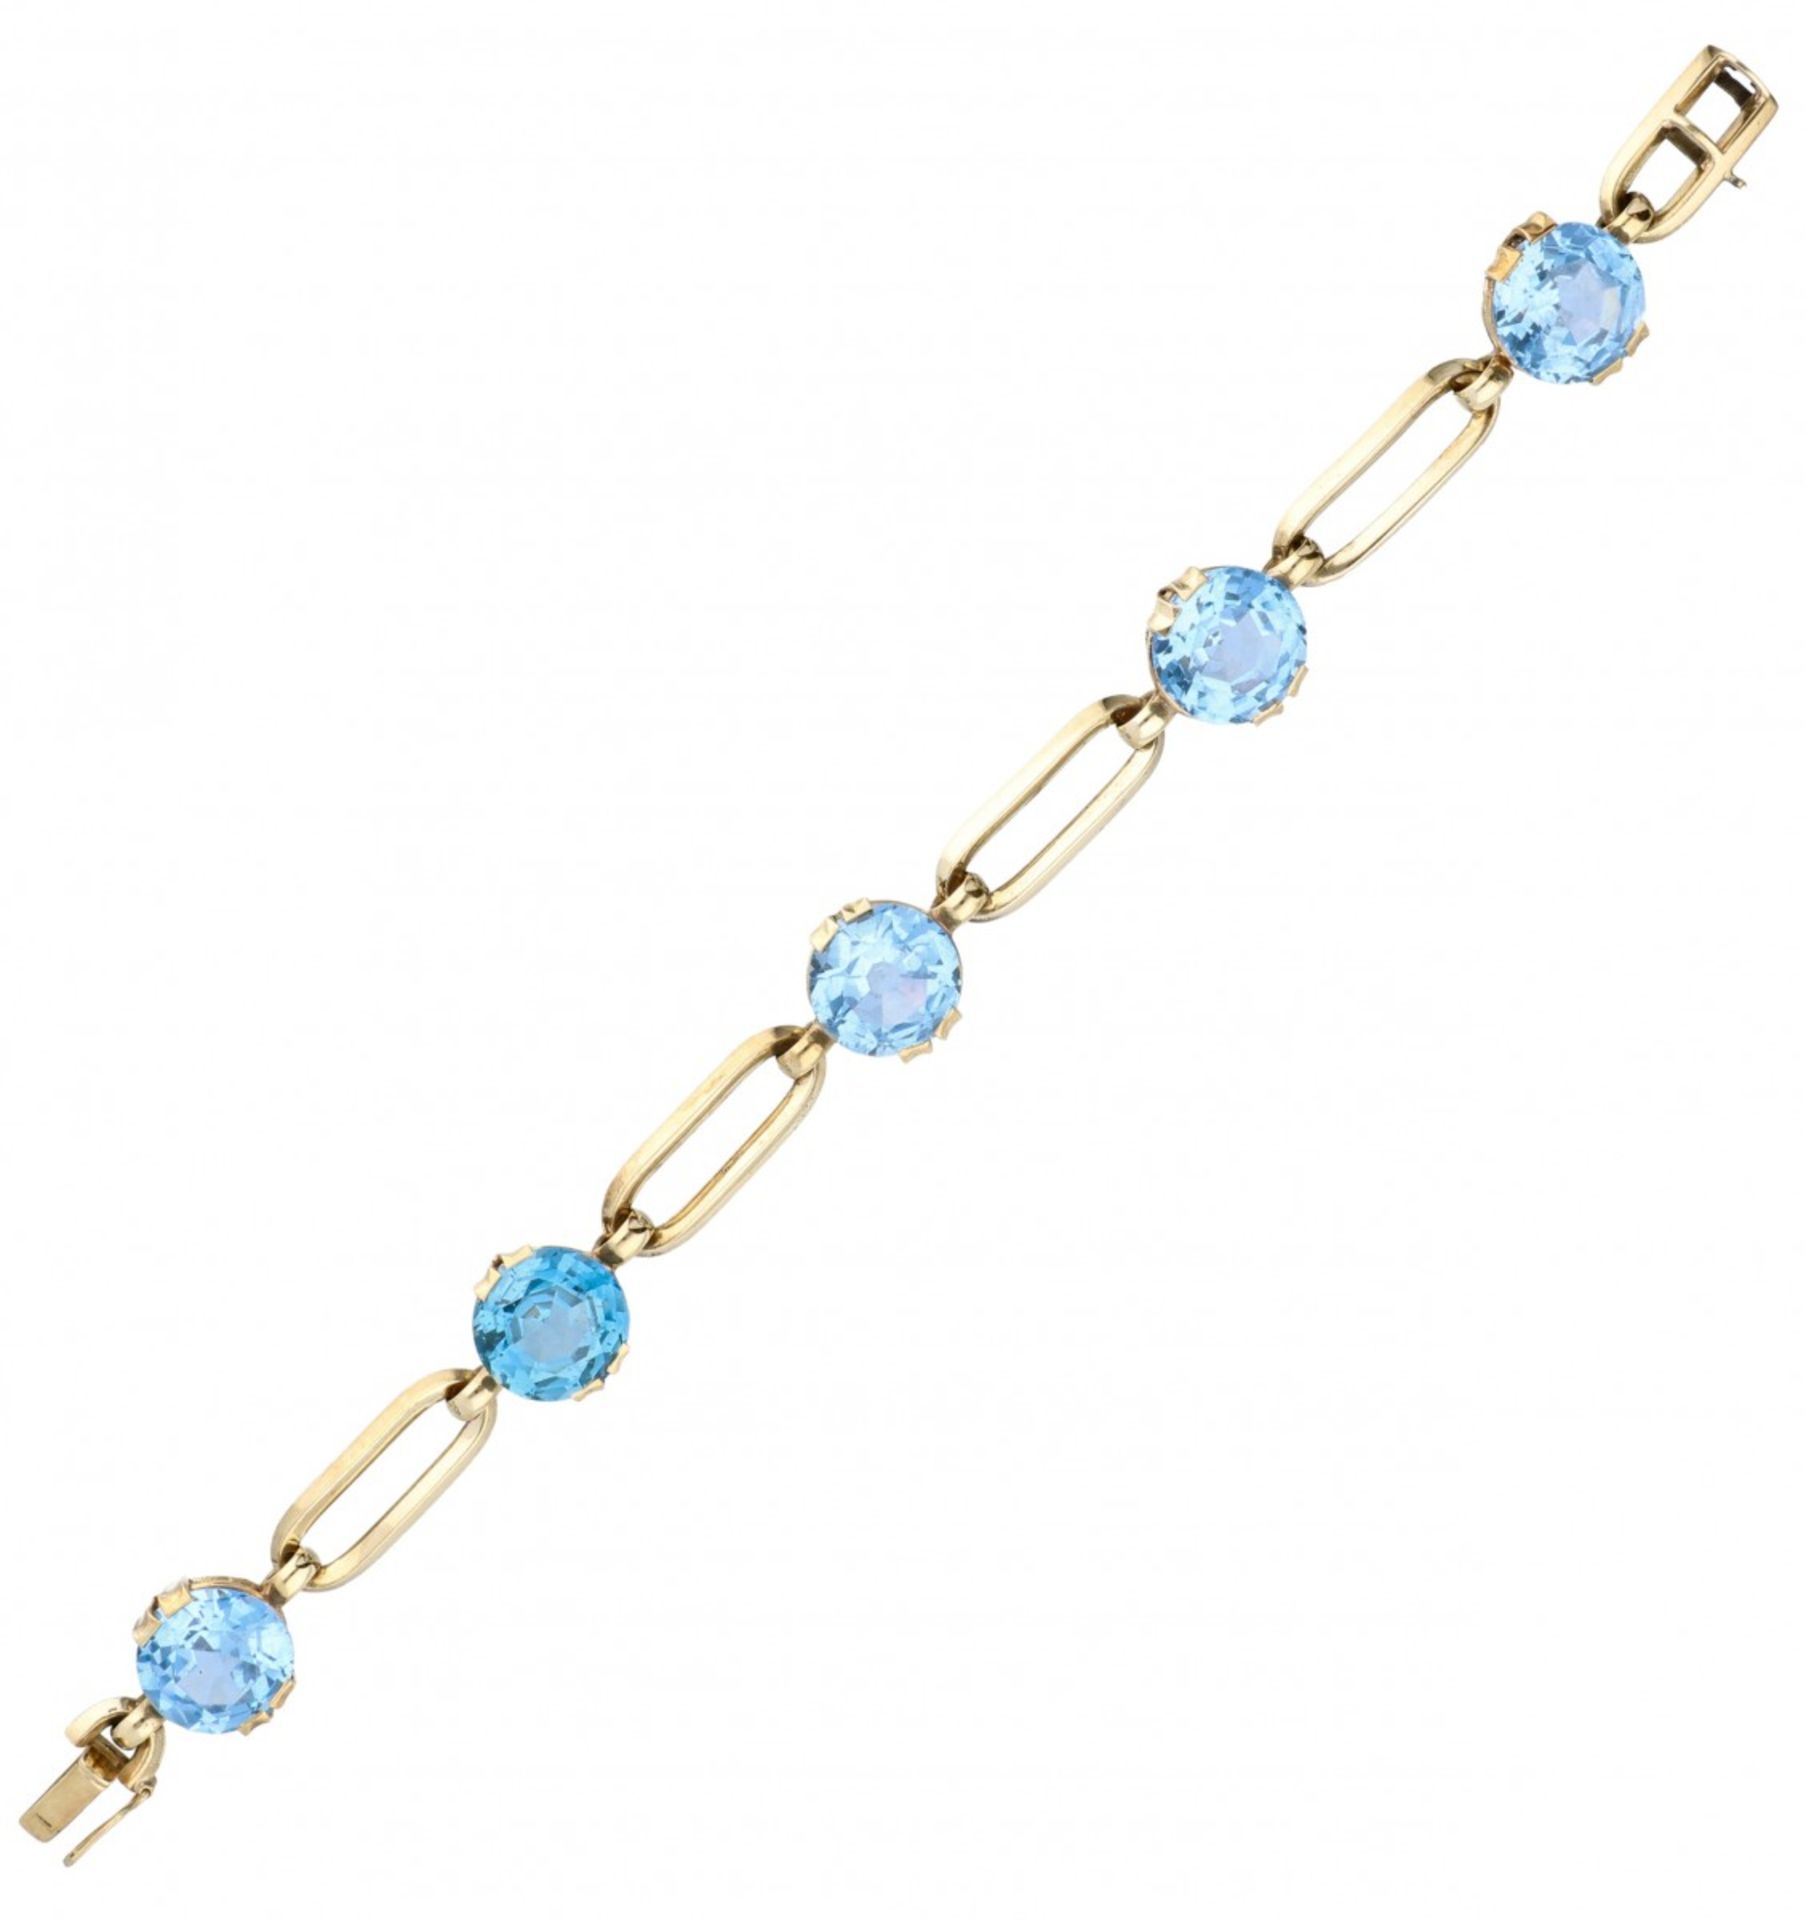 Yellow gold vintage bracelet set with approx. 35.95 ct. synthetic spinel - 14 ct. - Image 2 of 3